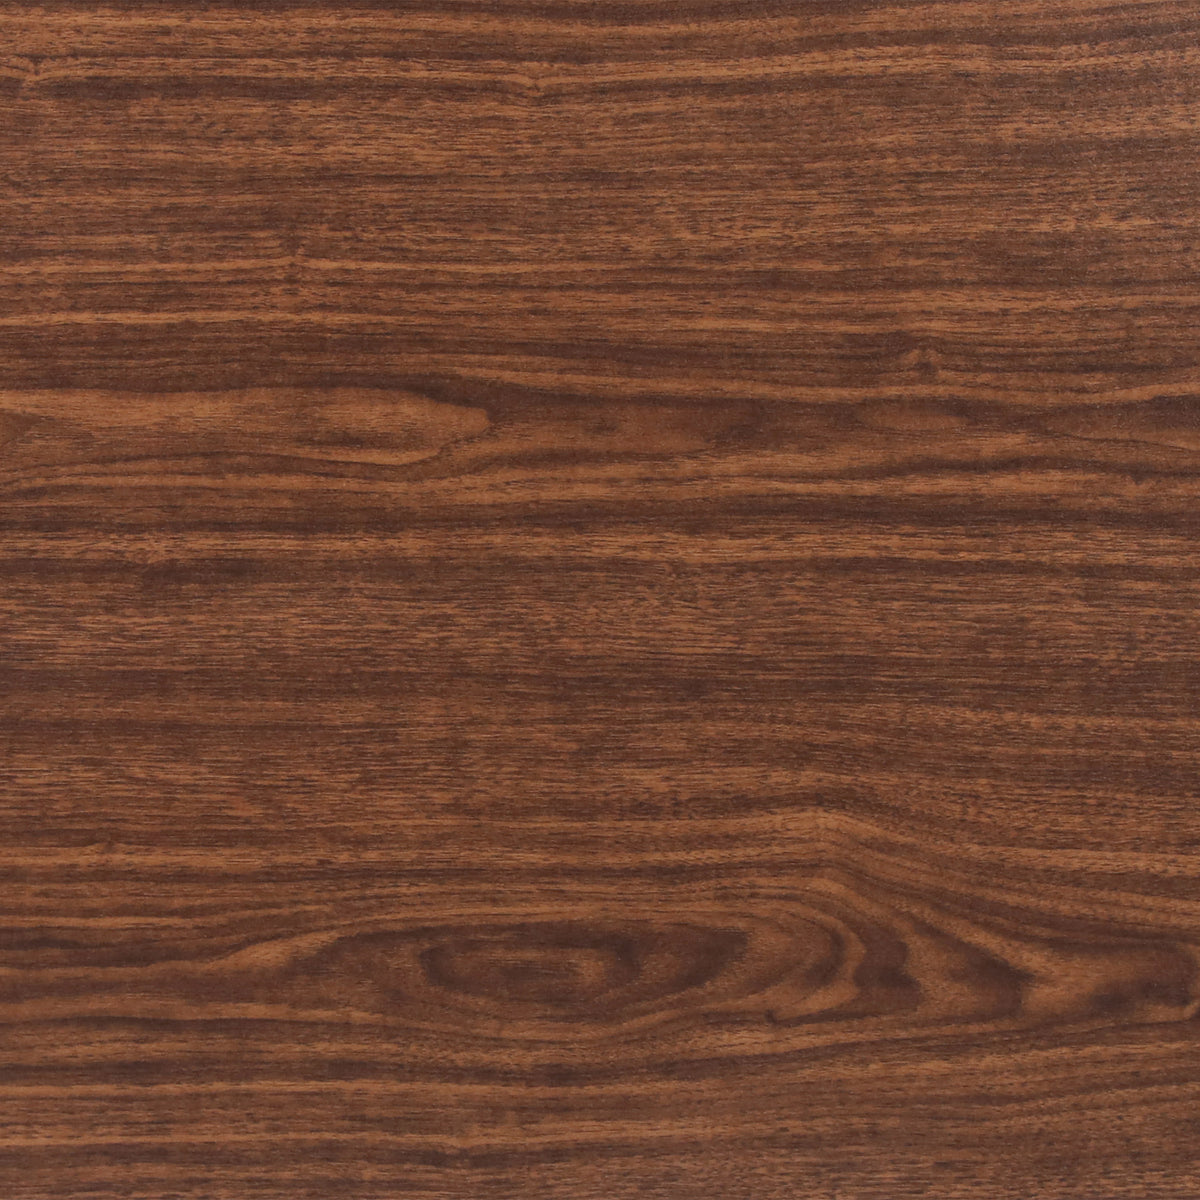 Walnut |#| Commercial 48x24 Conference Table with Laminate Top and U-Frame Base - Walnut